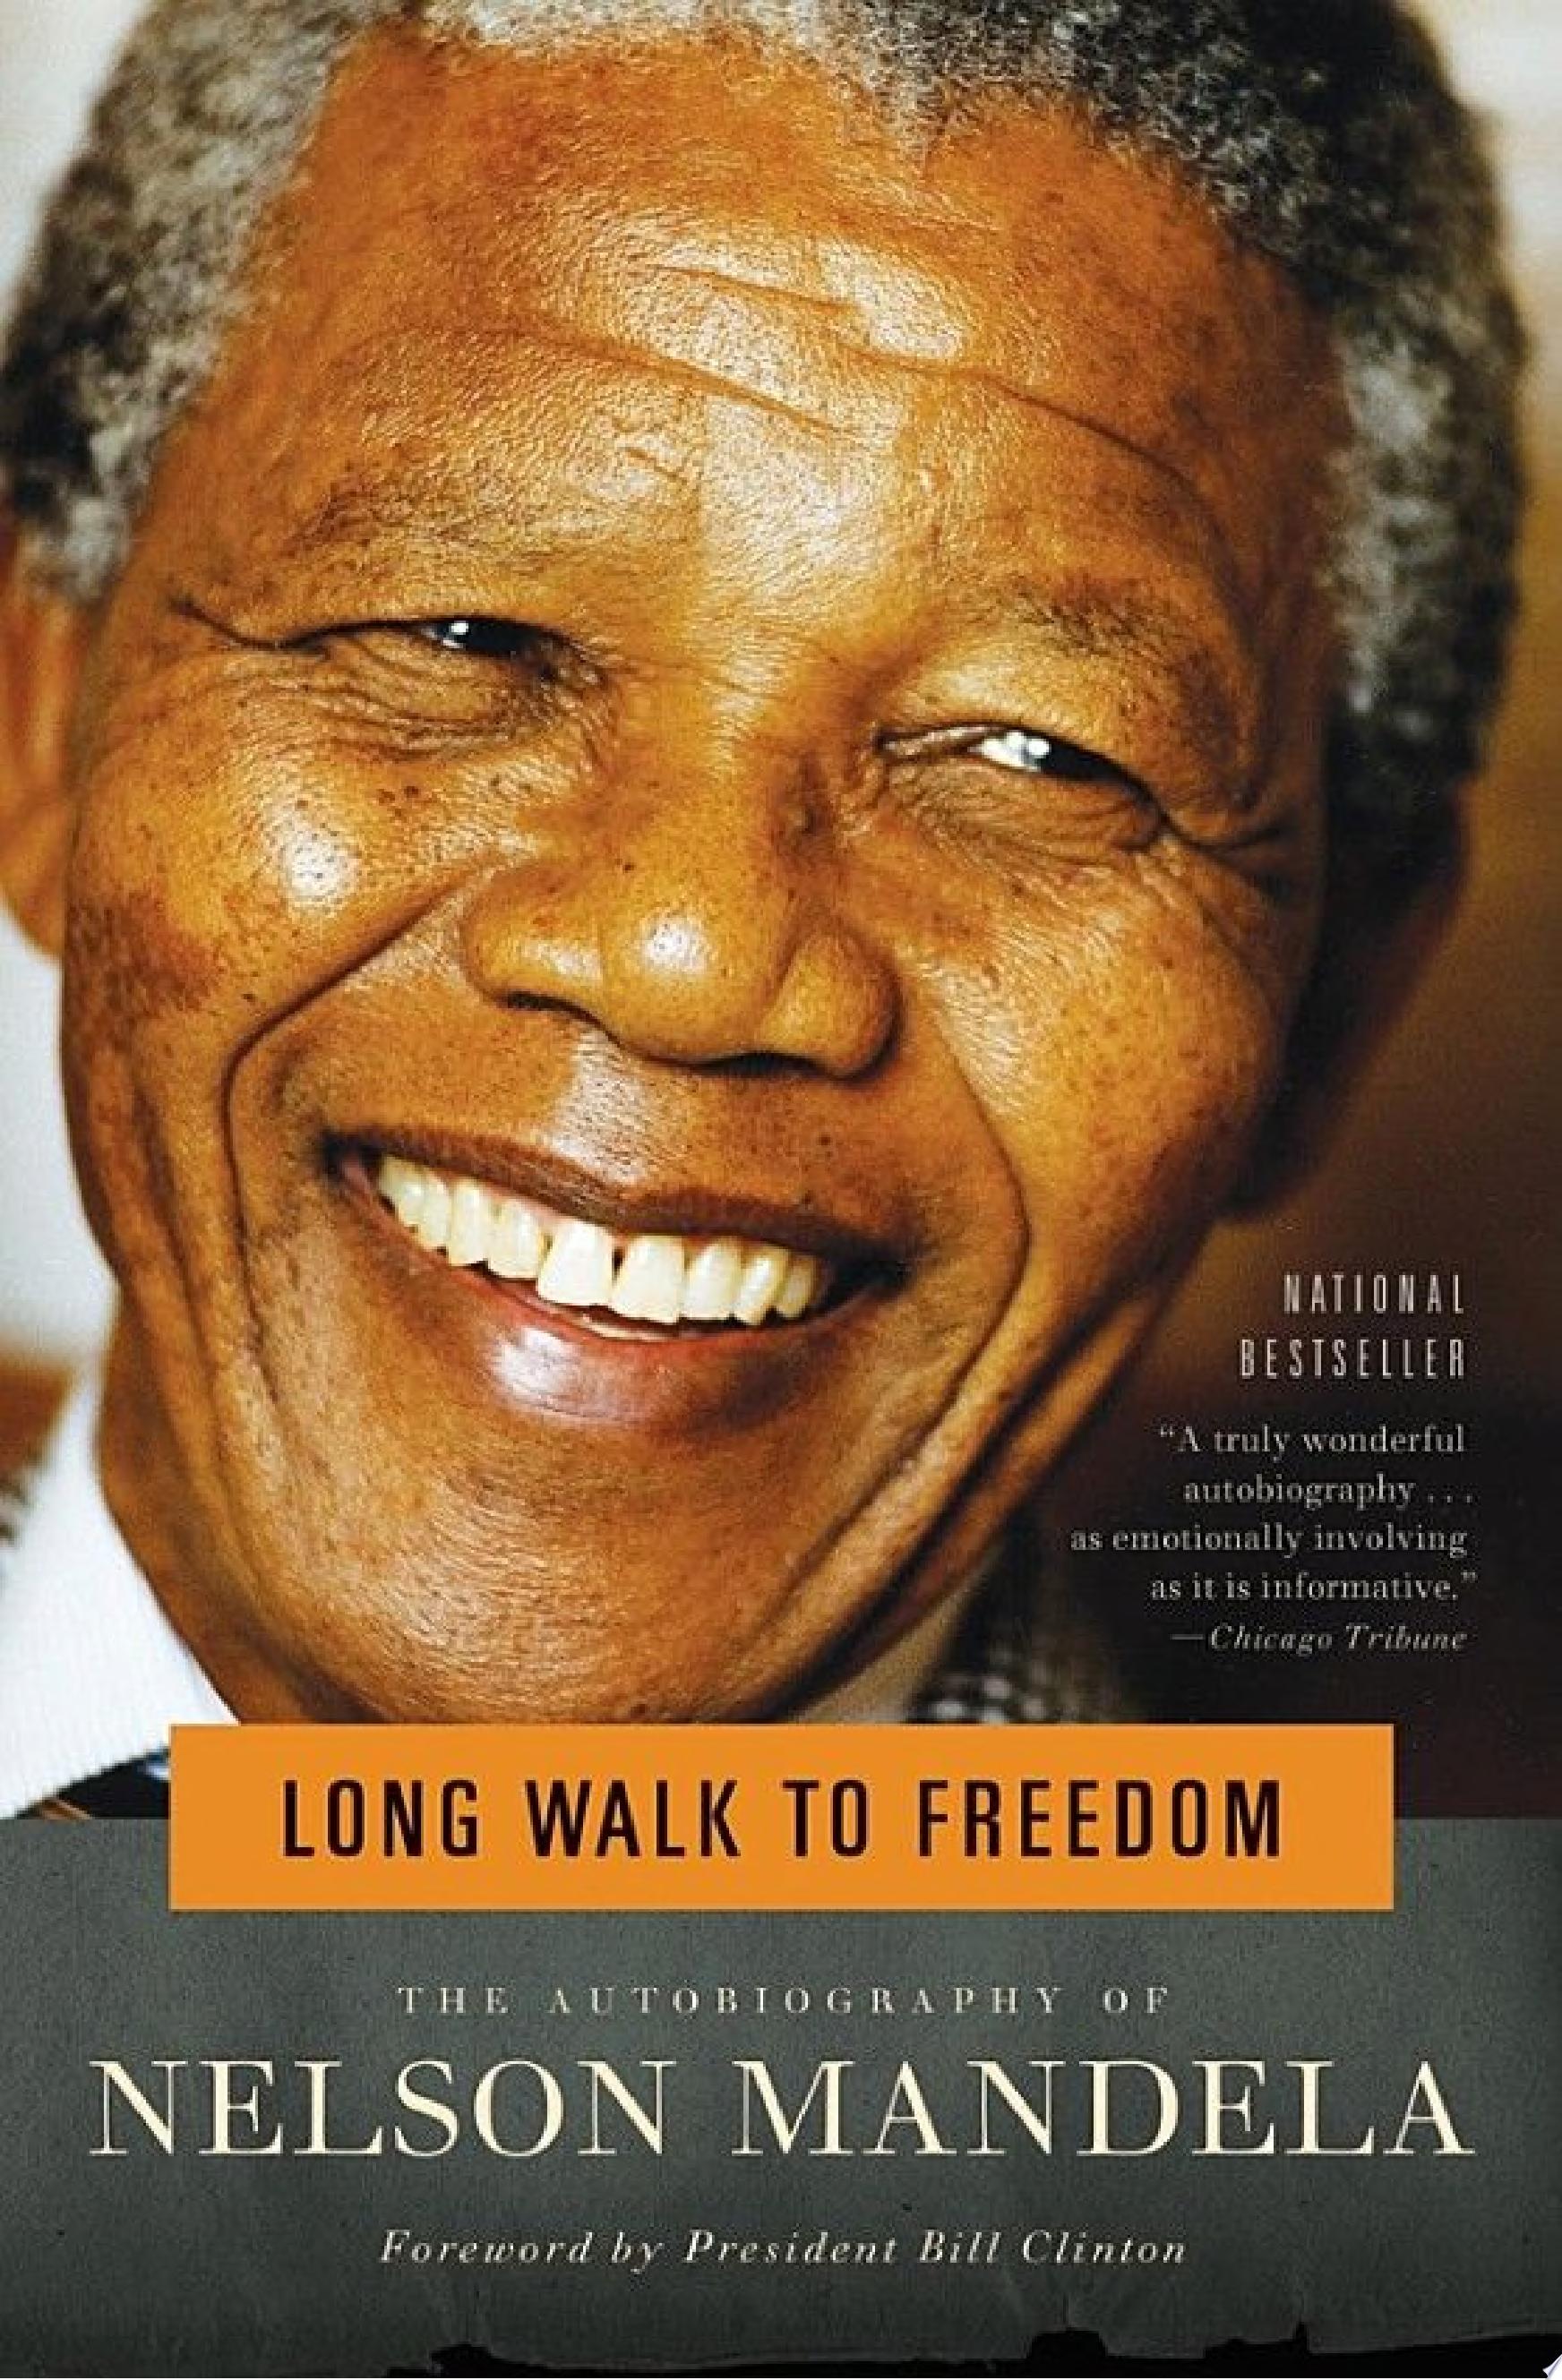 Image for "Long Walk to Freedom"